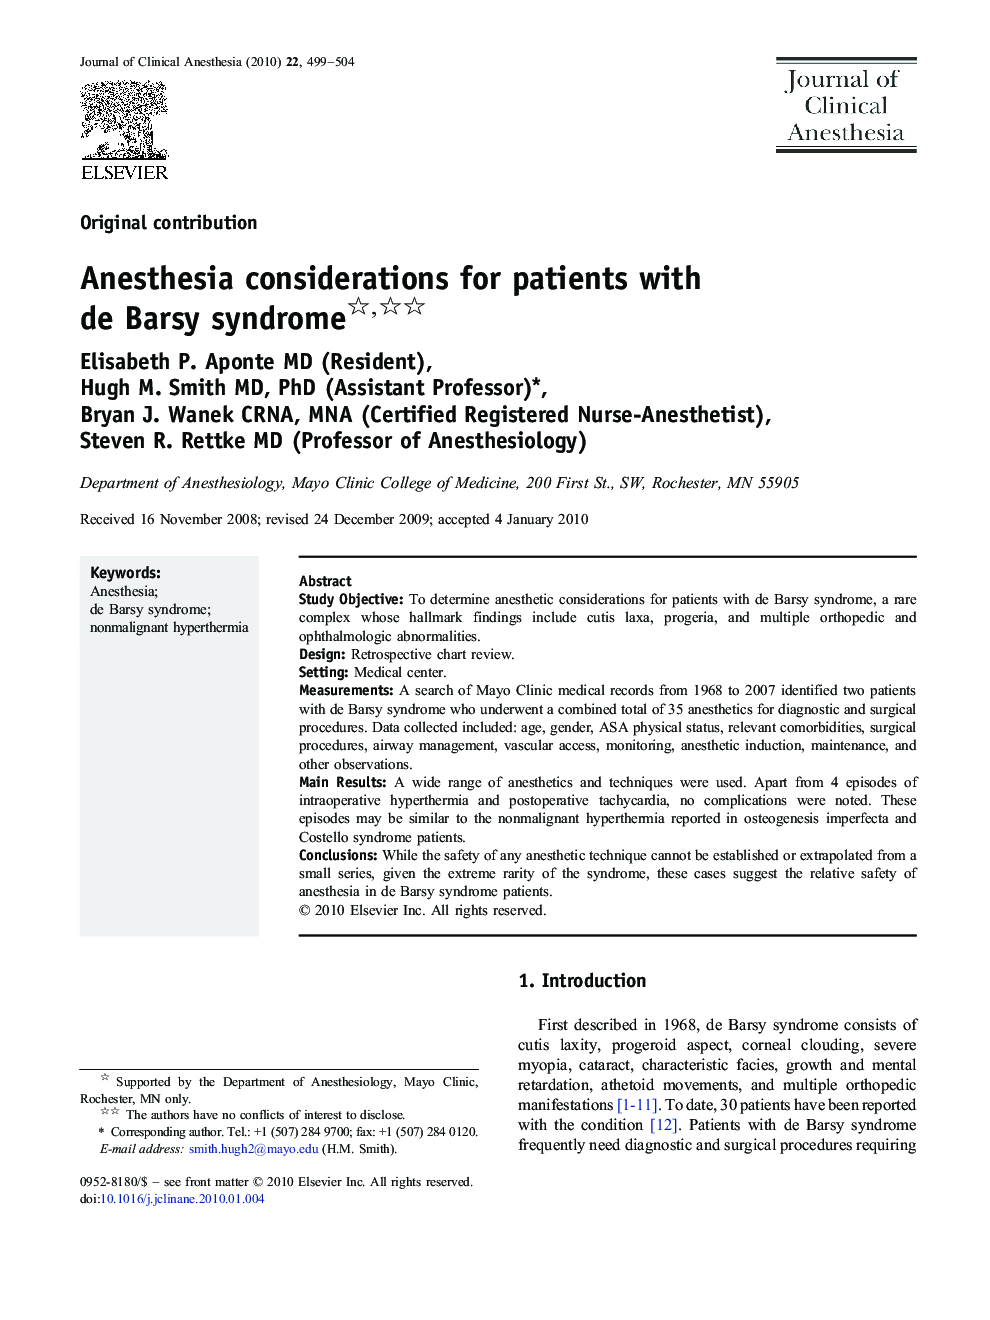 Anesthesia considerations for patients with de Barsy syndrome 